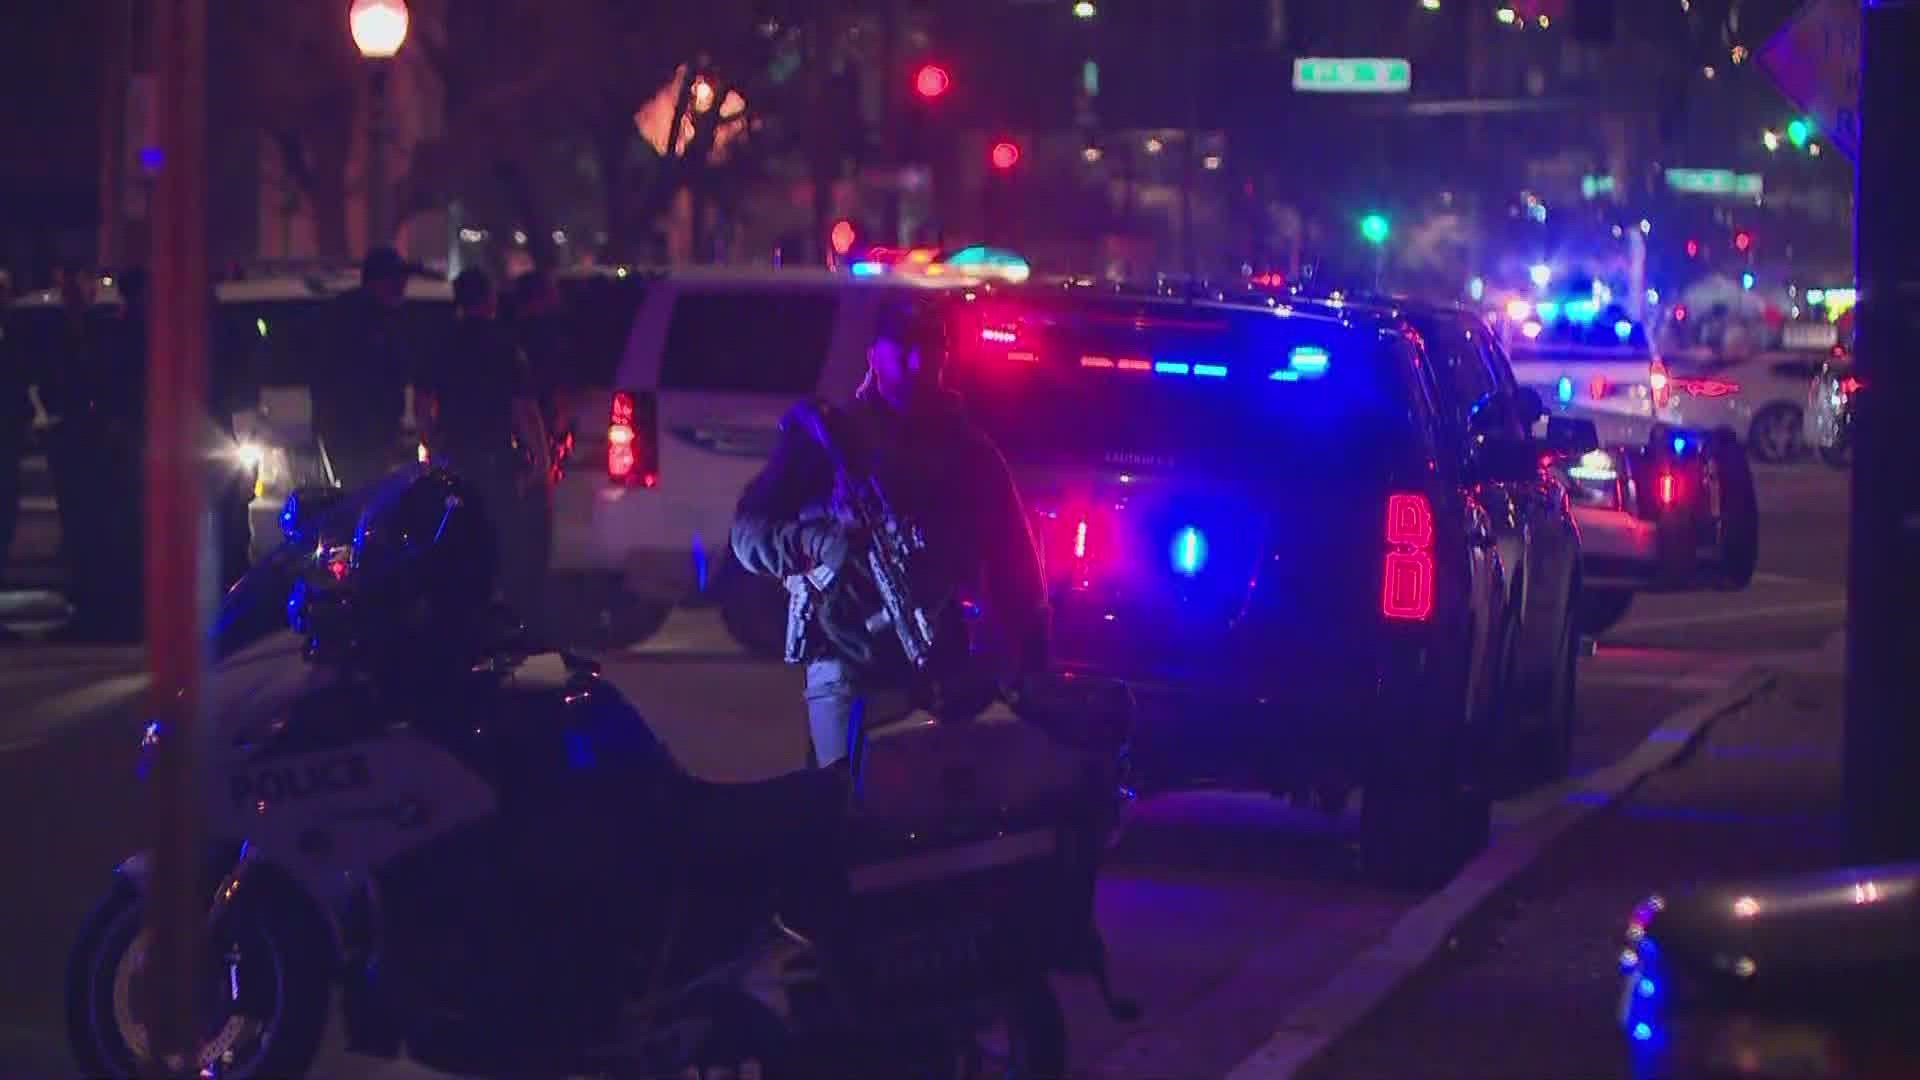 A Scottsdale officer was rushed to the hospital Friday night after being injured in a shooting near 2nd  Avenue and Roosevelt Street.